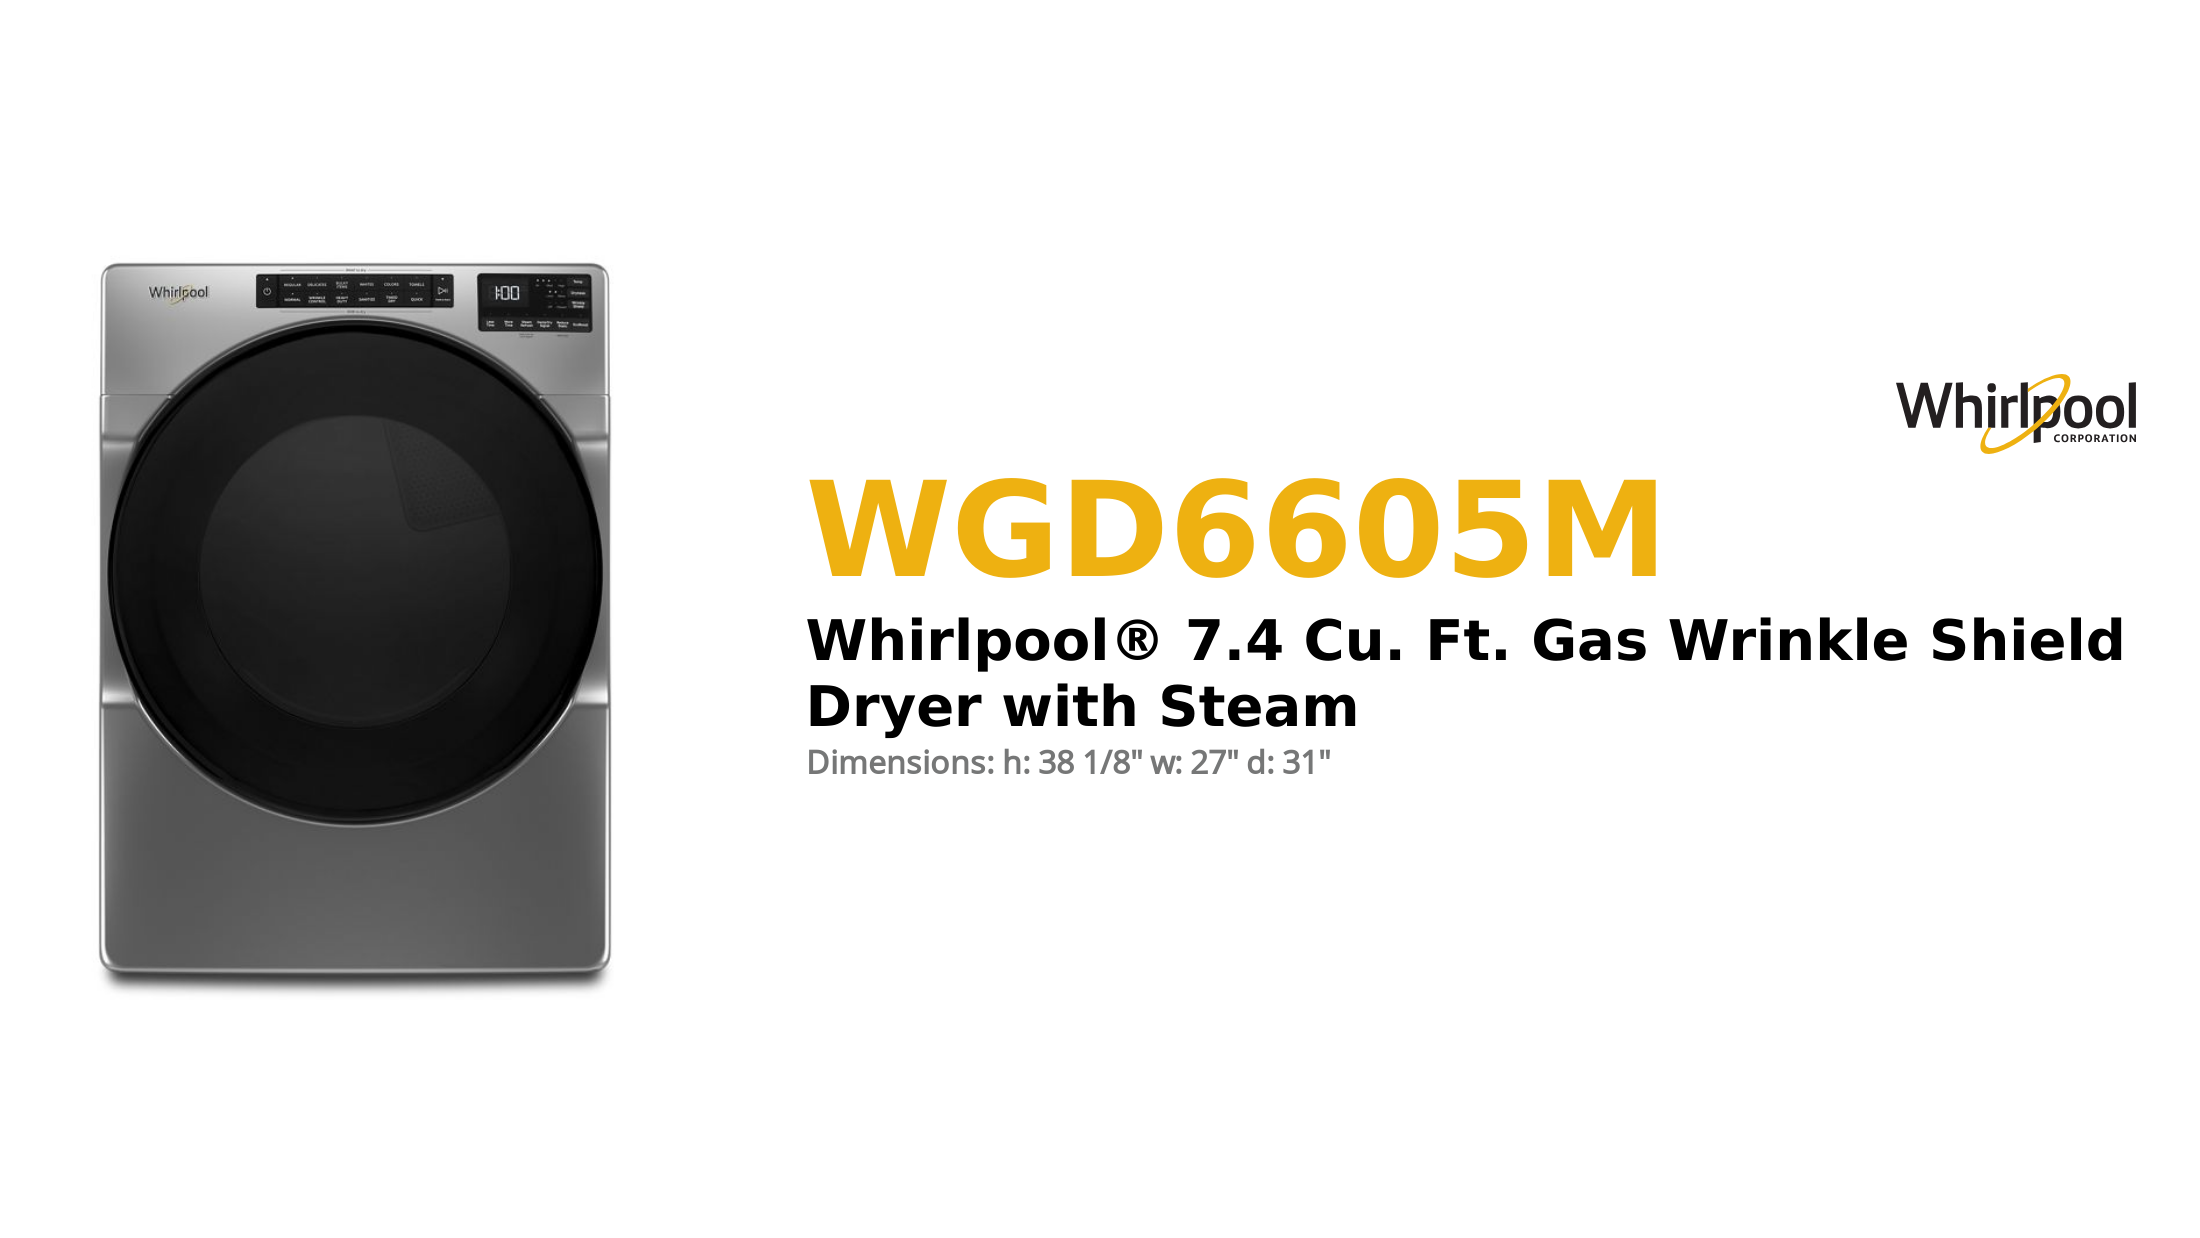 Whirlpool® 7.4 Cu. Ft. Gas Wrinkle Shield Dryer with Steam
 